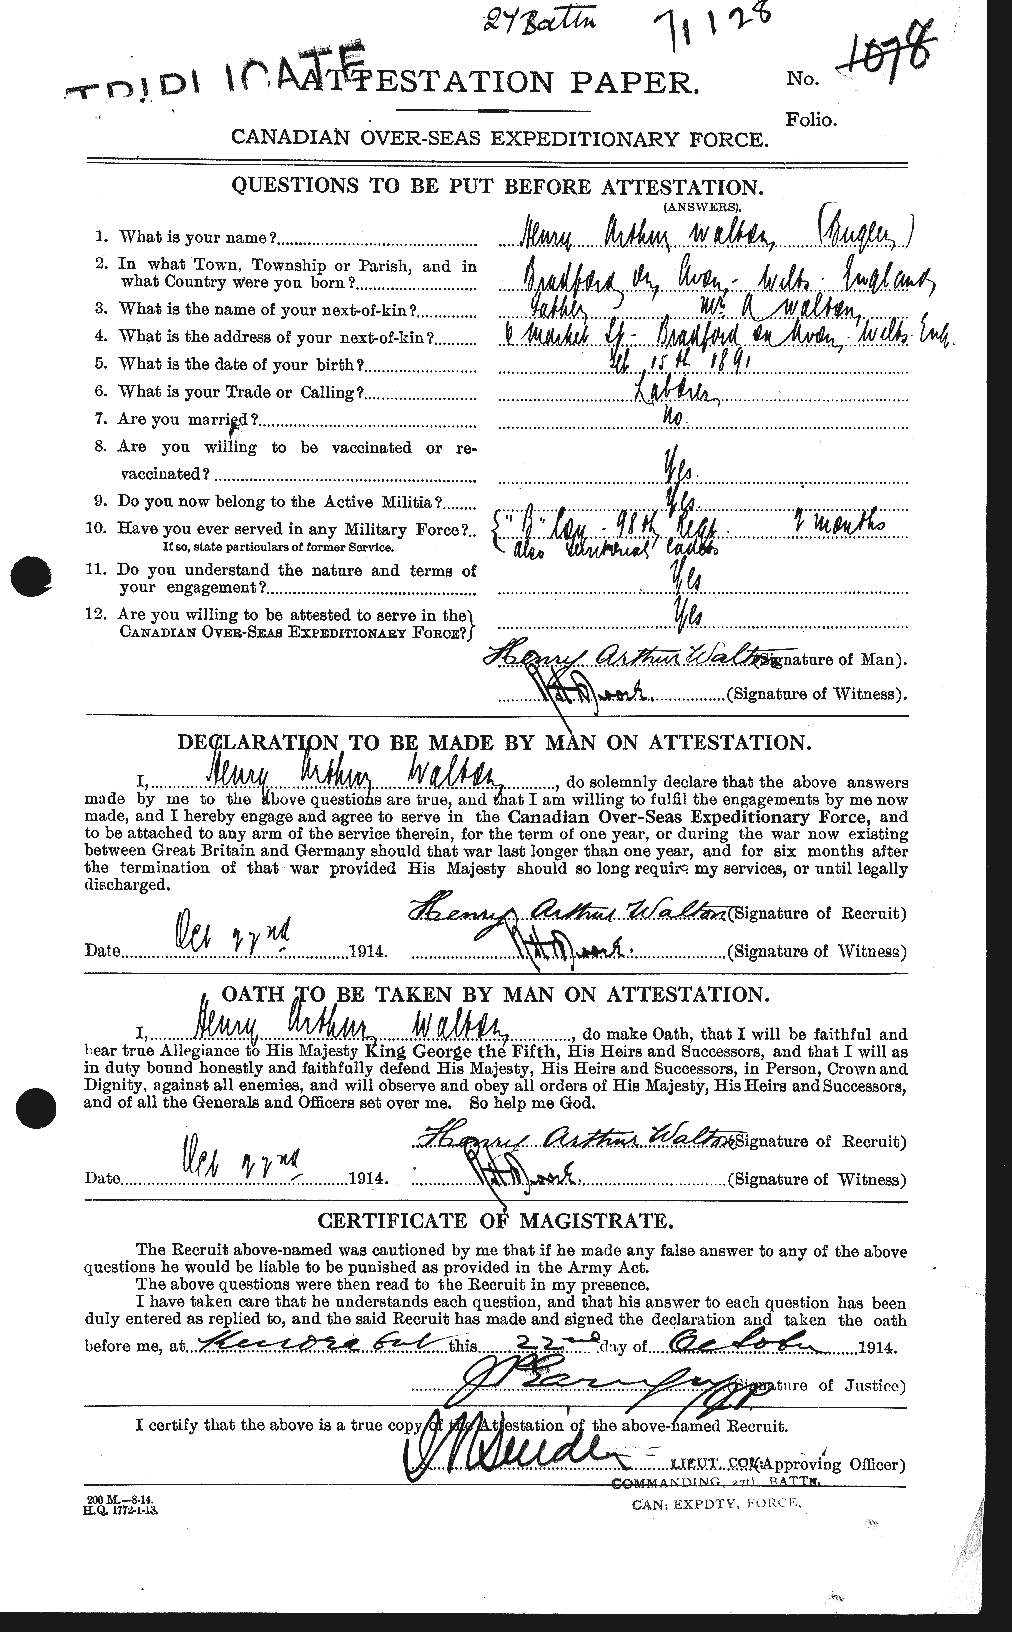 Personnel Records of the First World War - CEF 656820a